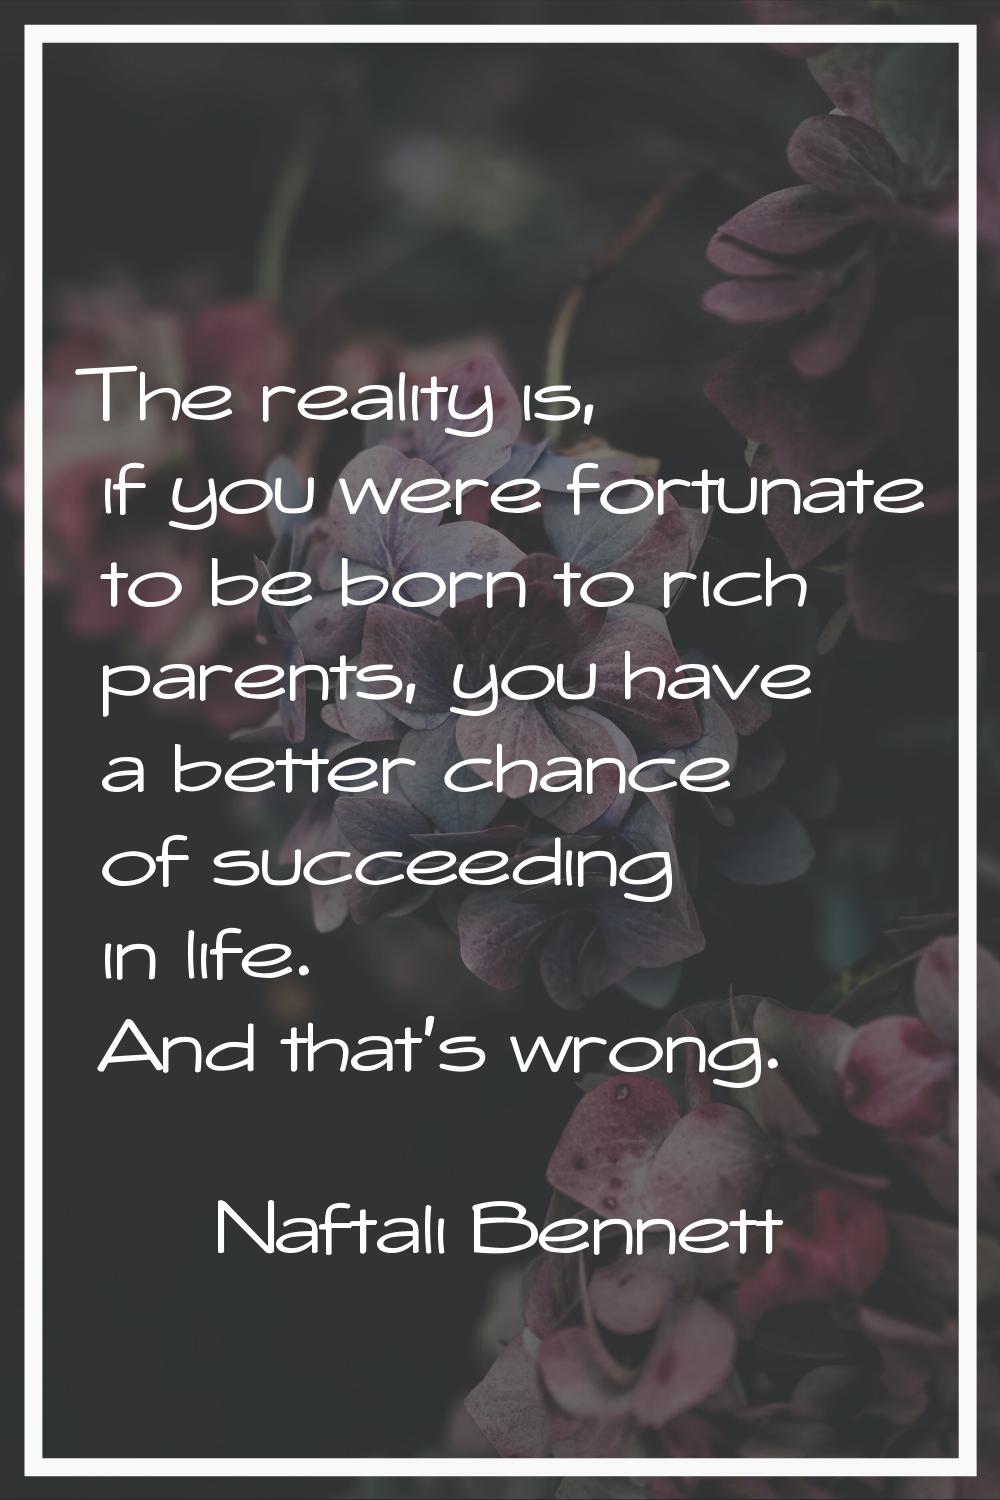 The reality is, if you were fortunate to be born to rich parents, you have a better chance of succe